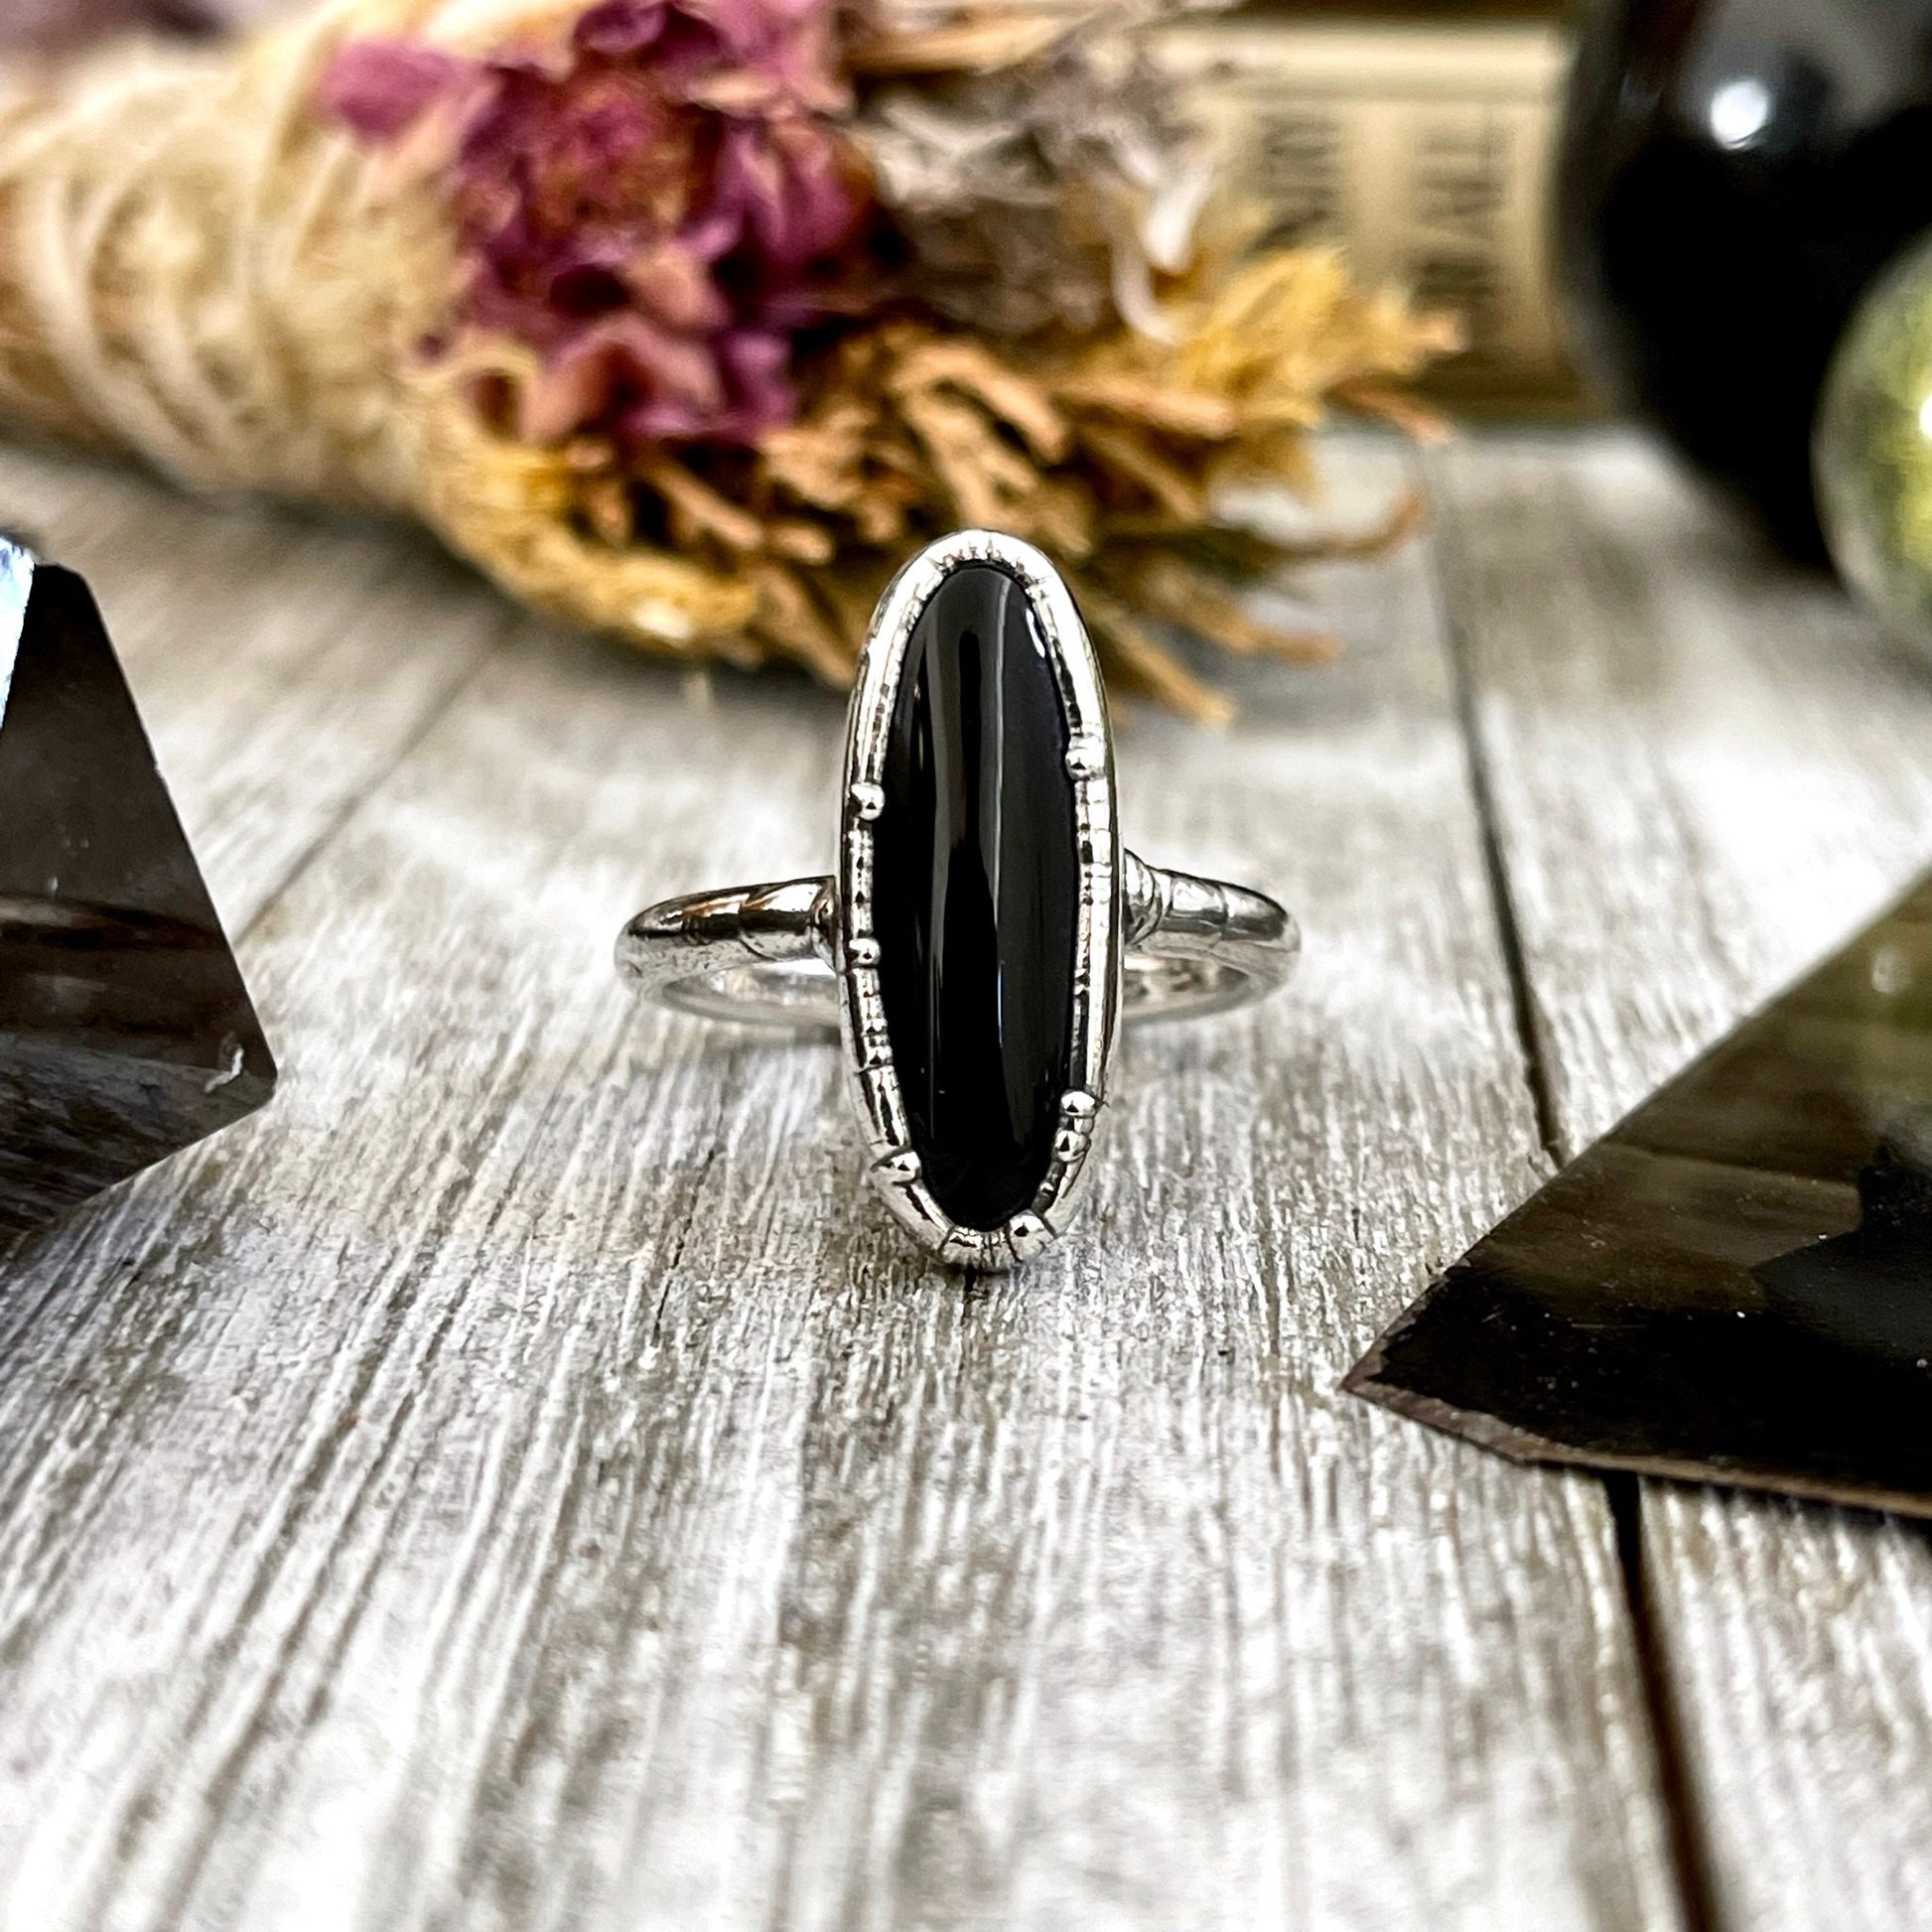 Black Onyx Oval Stone Ring in Fine Silver Size 6 7 8 9 10 / Foxlark Collection